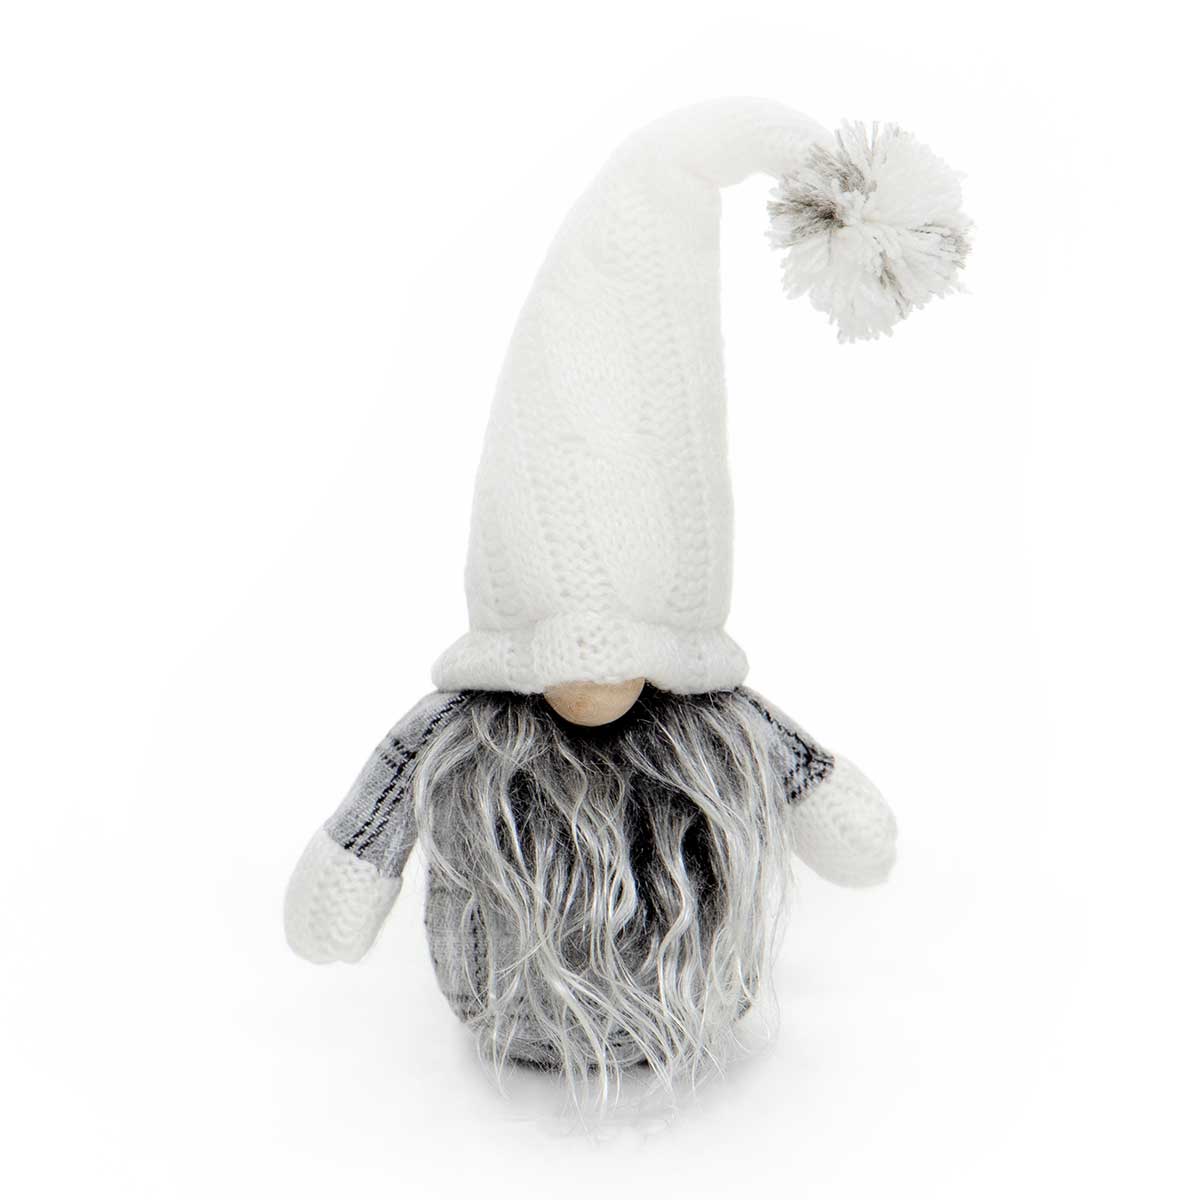 Pom-Pom Gnome Grey/Cream with Wired Cable Knit Sweater Hat Small